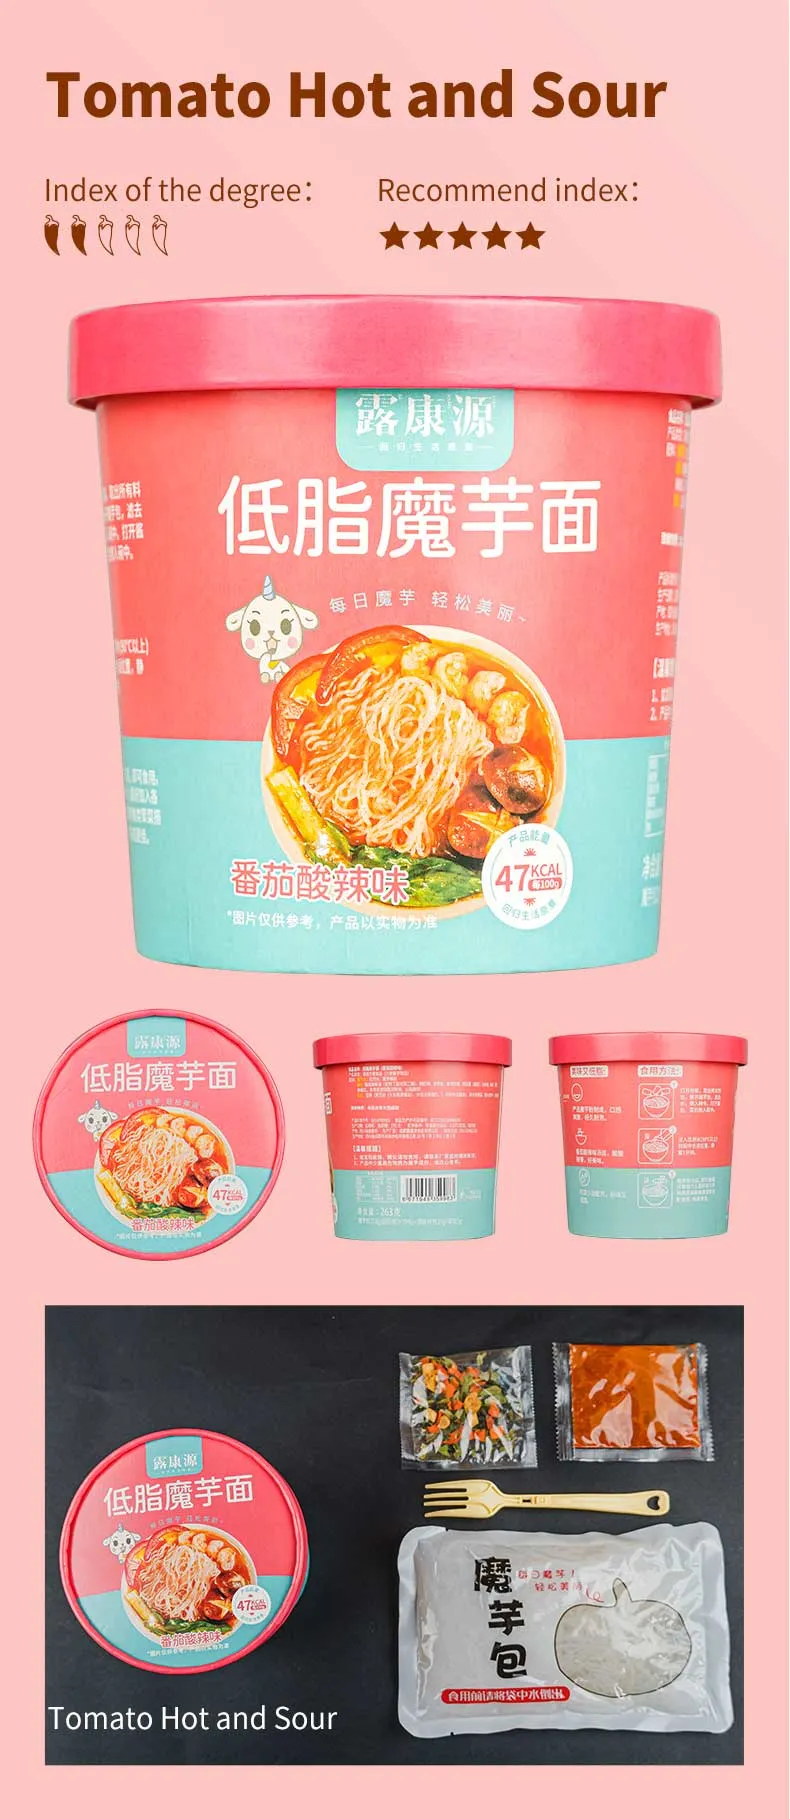 Fat Free Cup Tomato Flavor Healthy Slim Food Hot Sale The Instant Noodles Konjac Chinese